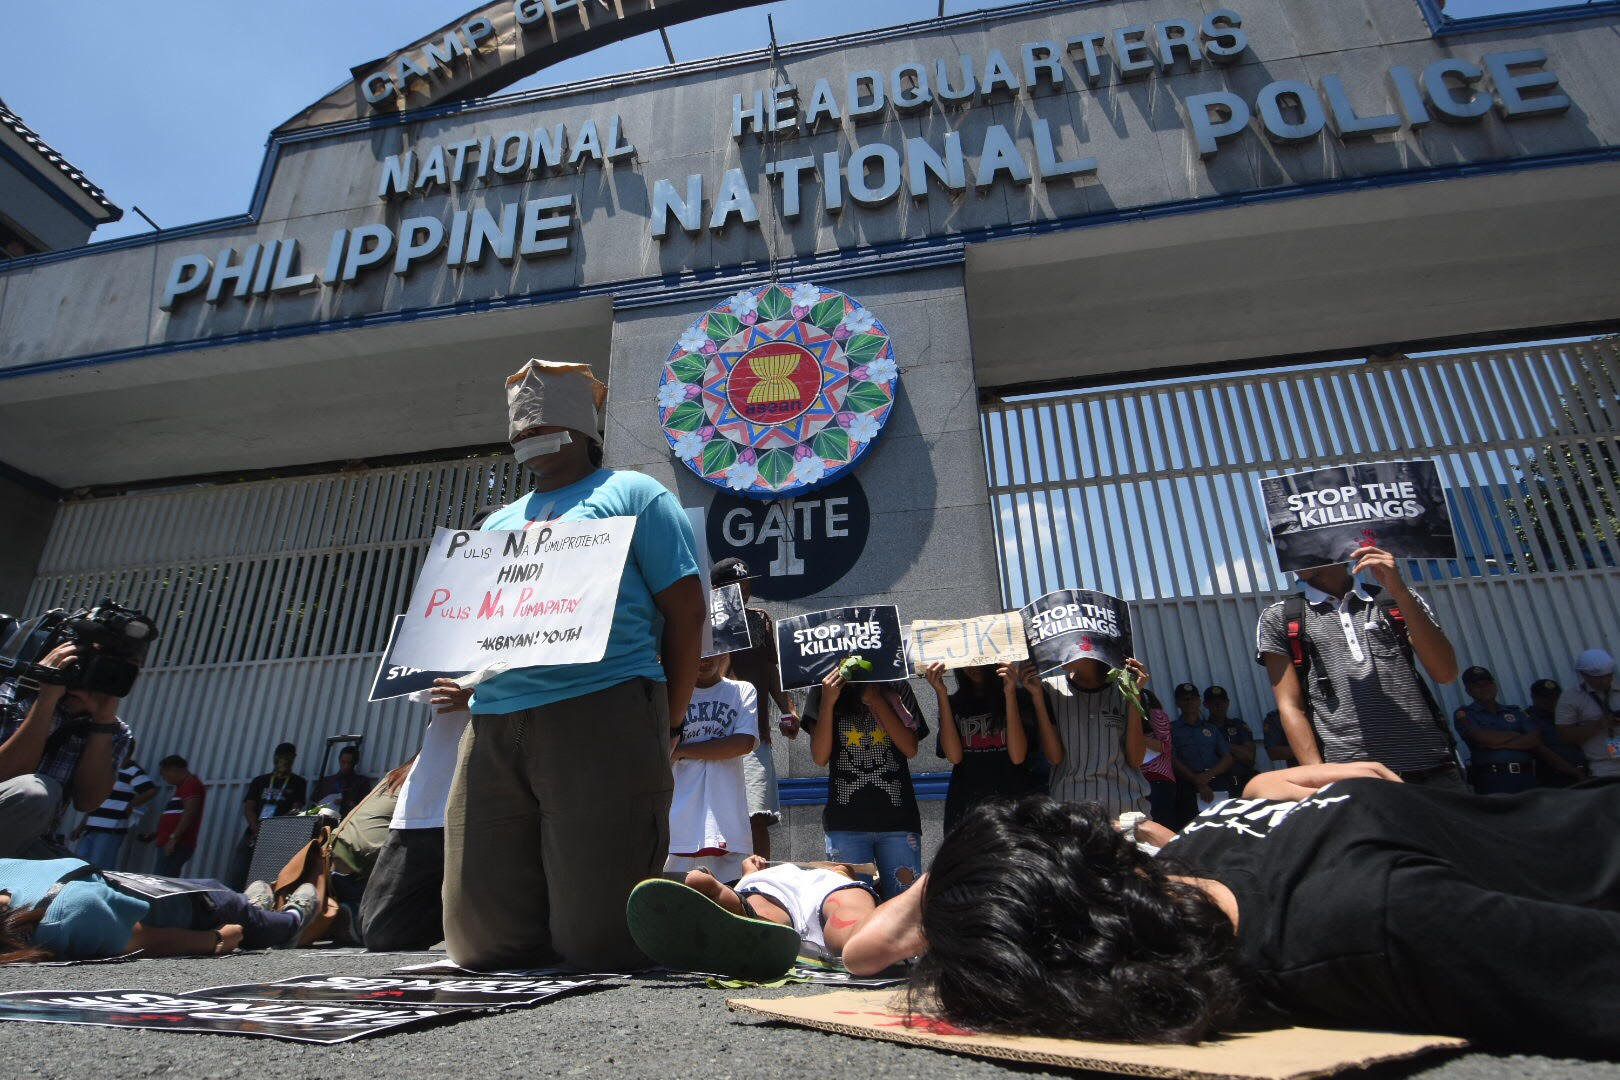 ZERO EJK? Protesters call for end to drug war killings in front of the PNP headquarters. File photo by Angie de Silva/Rappler  